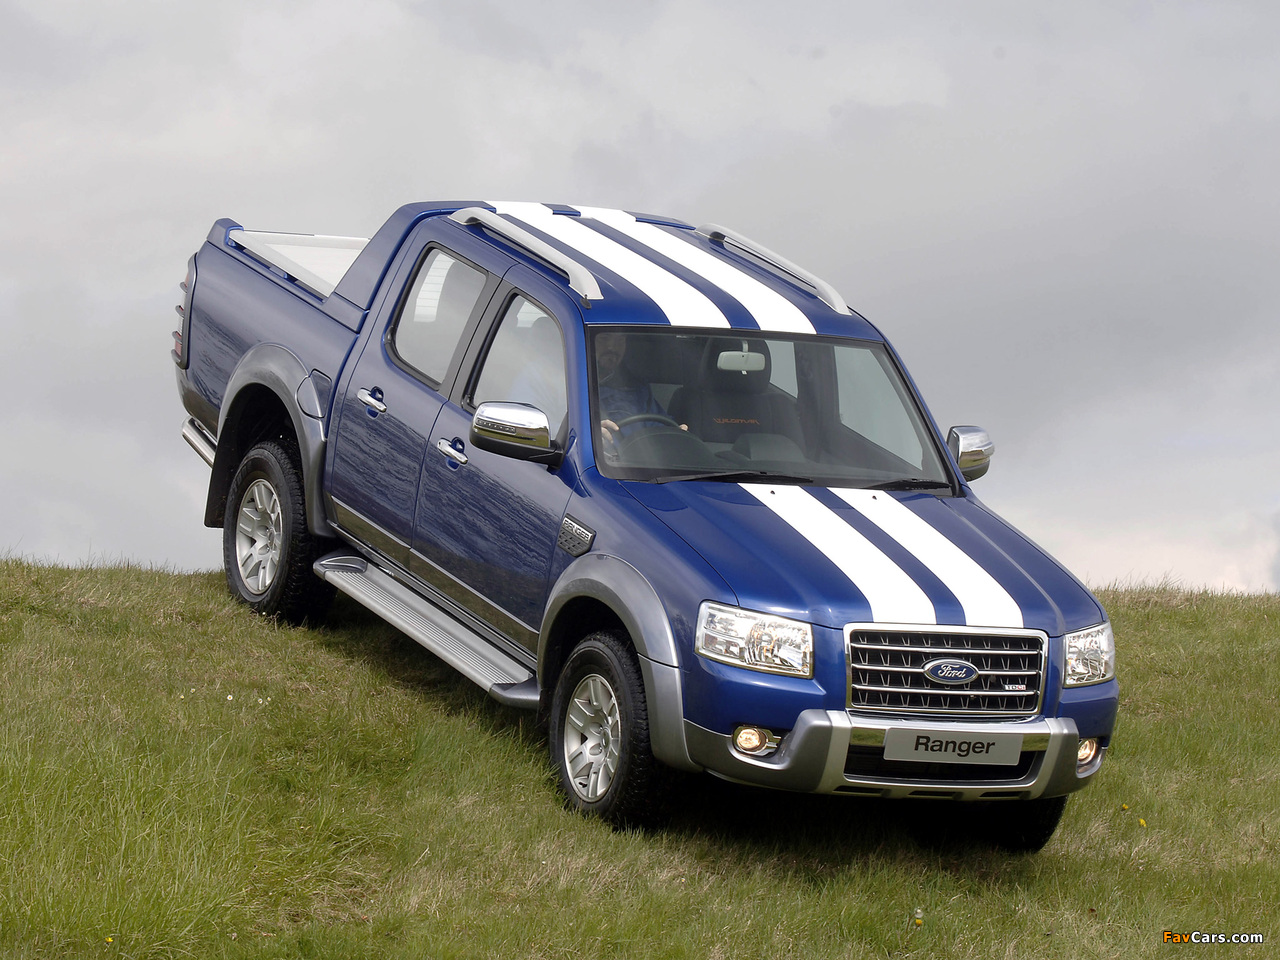 Ford Ranger Wildtrak Le Mans Edition 2008 pictures (1280 x 960)